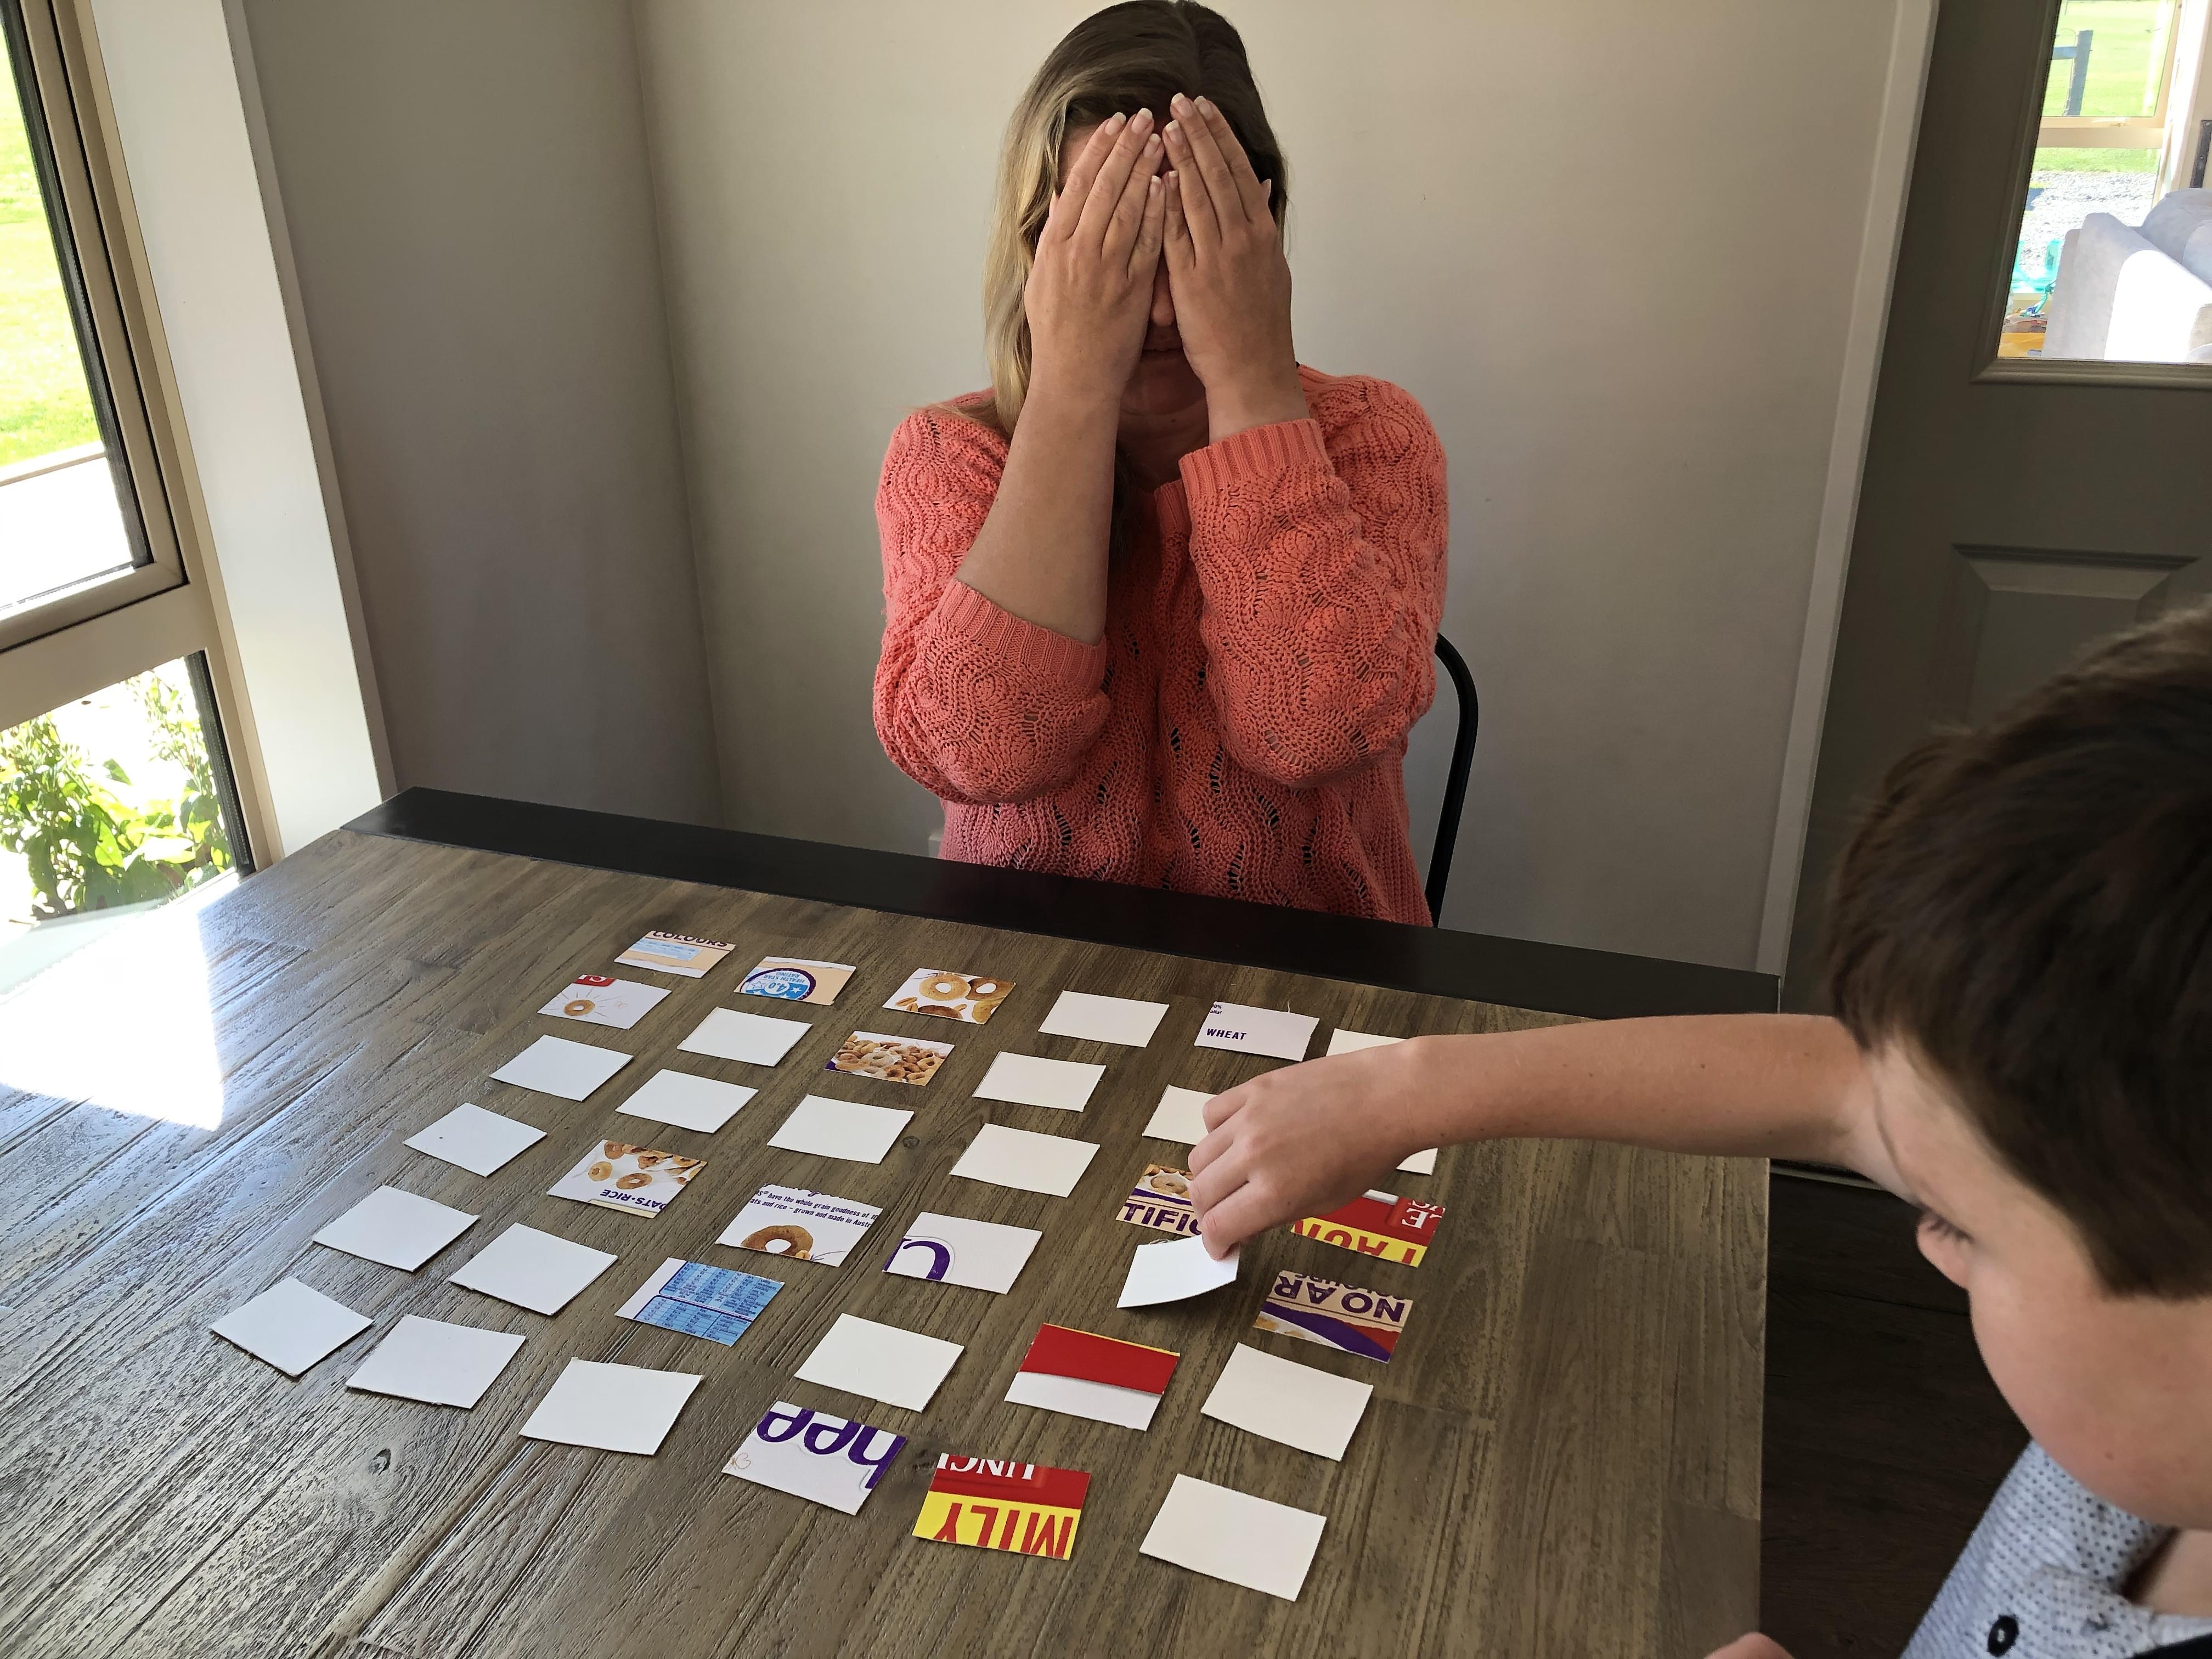 Adult closes eyes while the child flips over one of the cards.